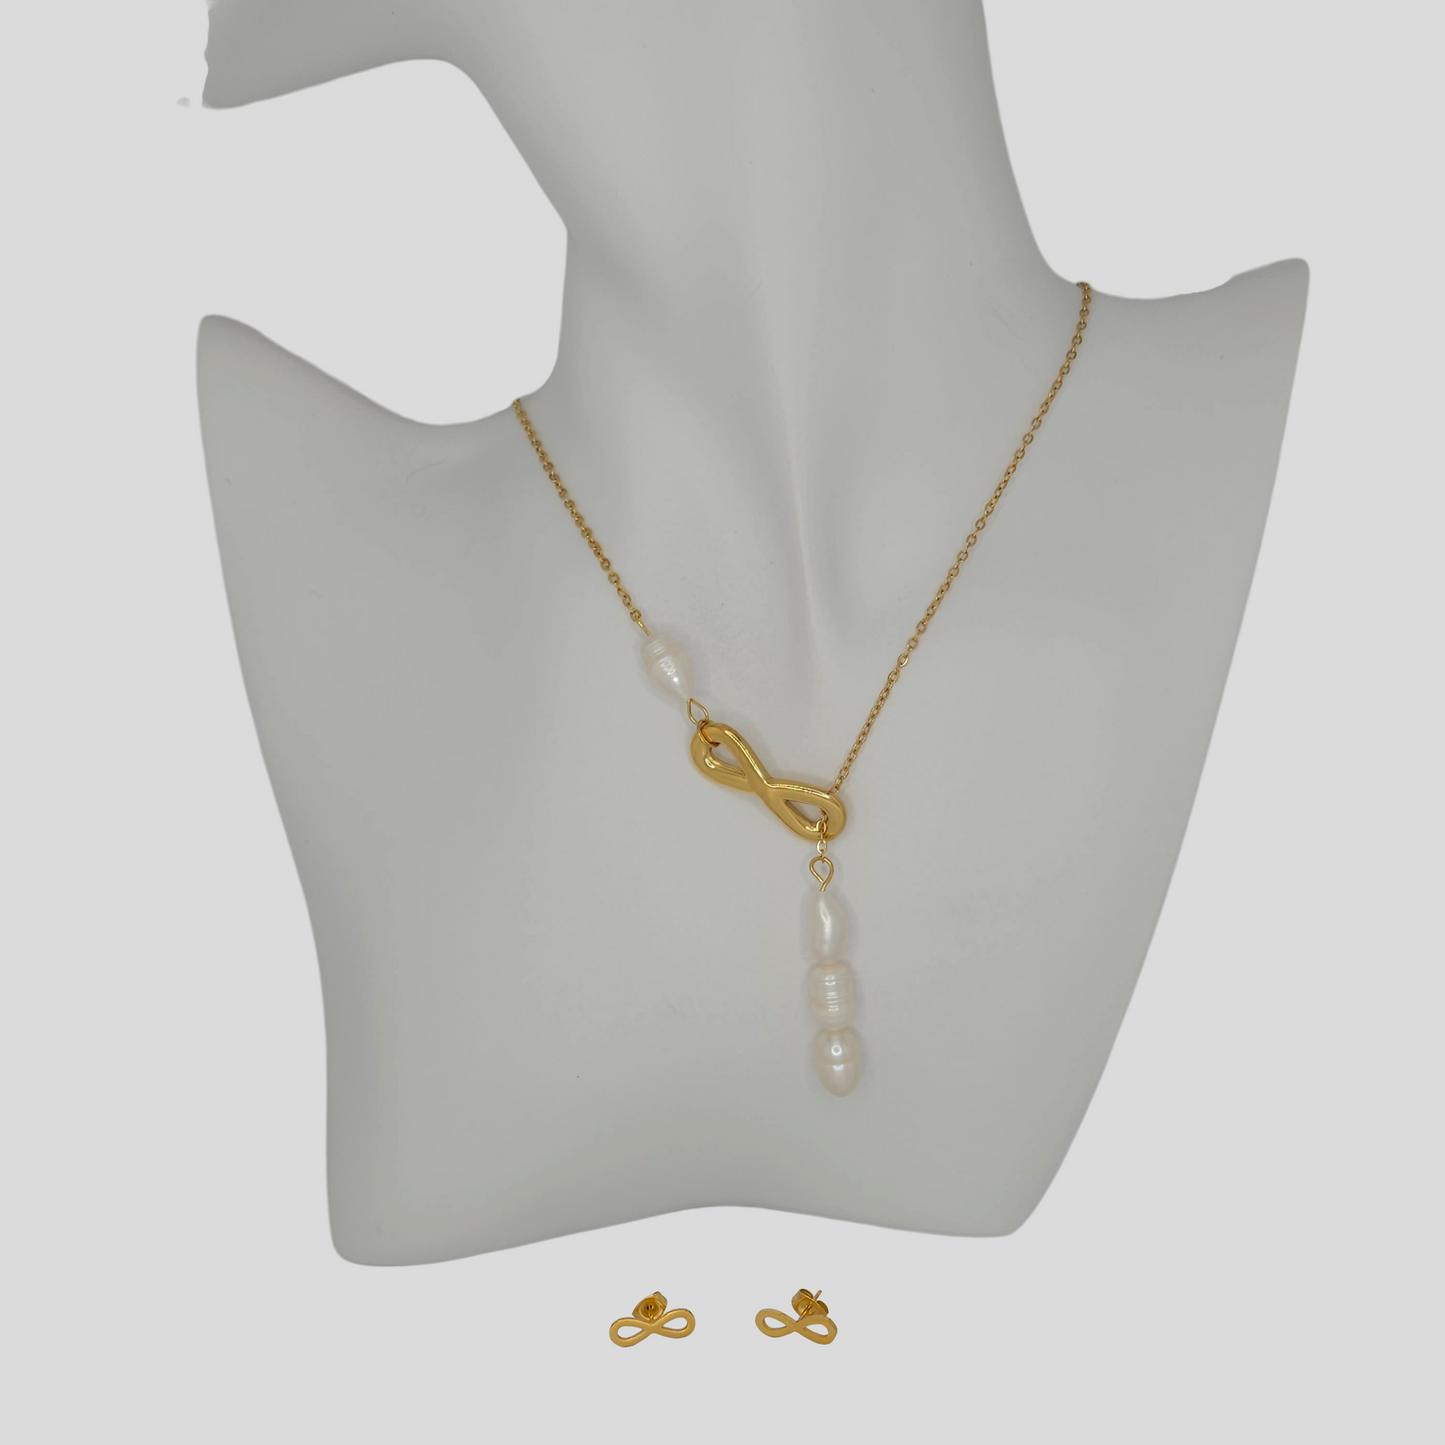 INFINITY PEARL LARIAT NECKLACE AND EARRINGS STAINLESS STEEL GOLD COLOR WITH NATURAL PEARL